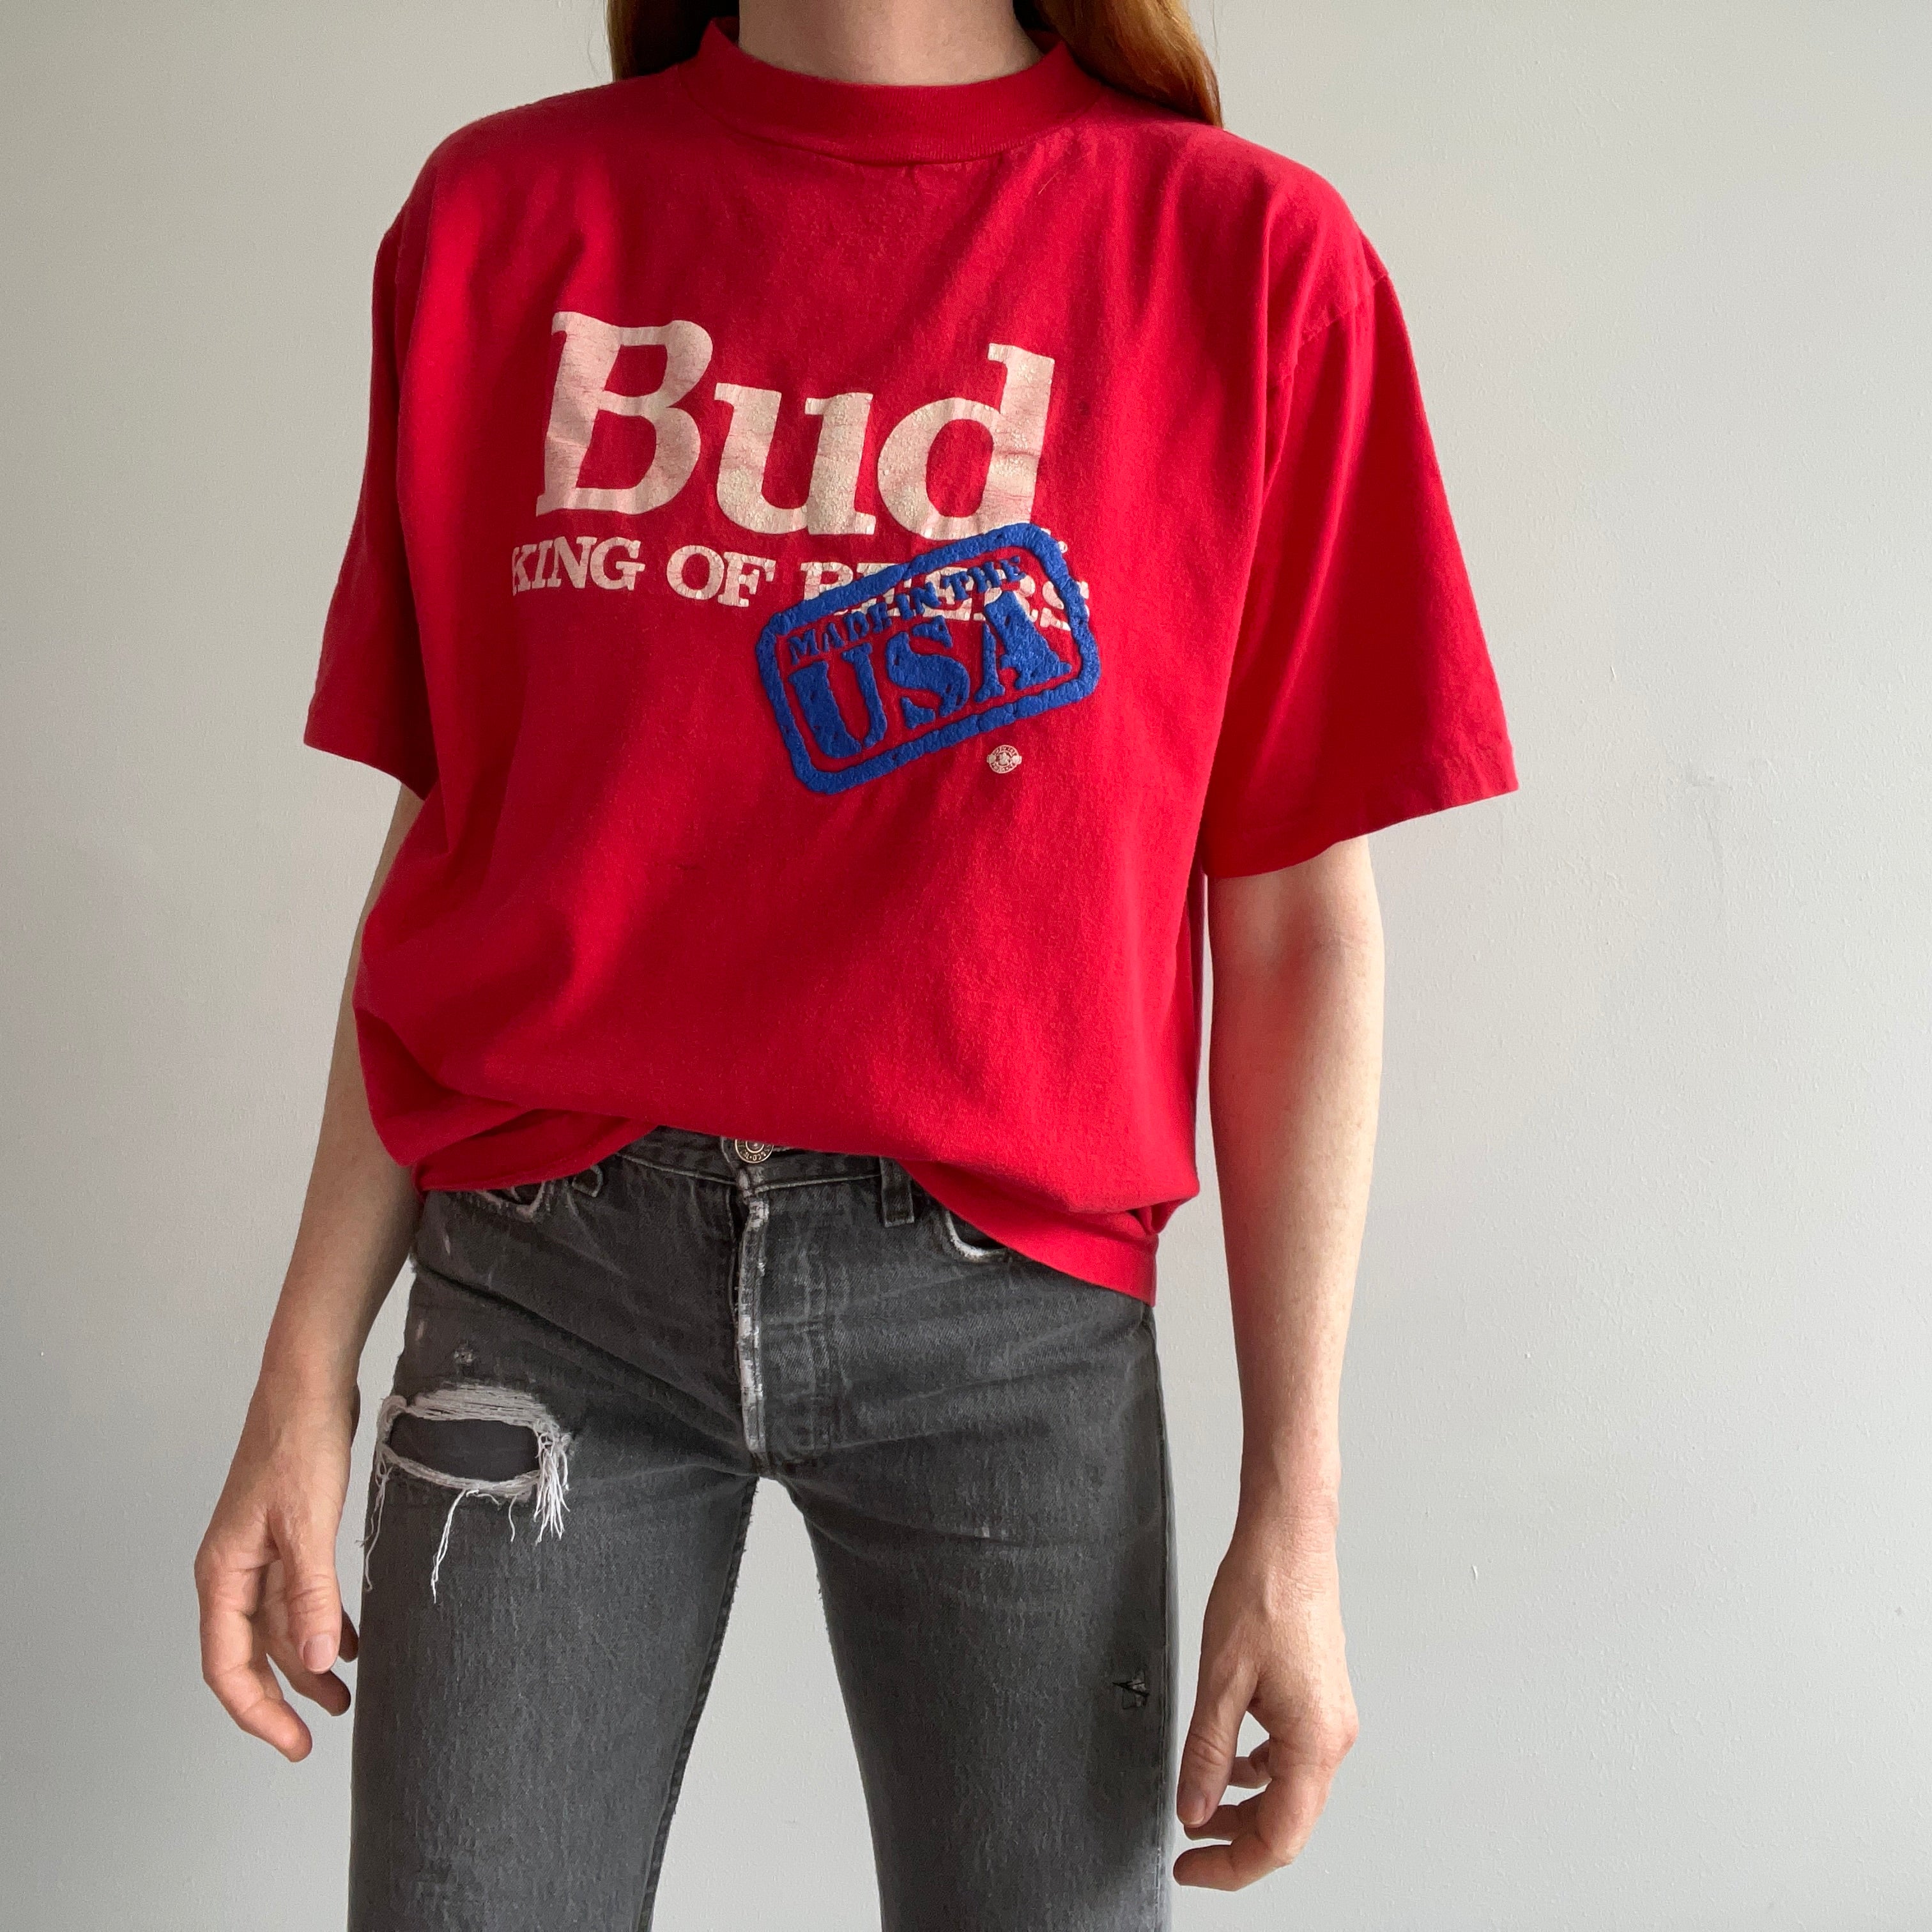 1980s Bud - The King Of Beers - Cotton T-Shirt